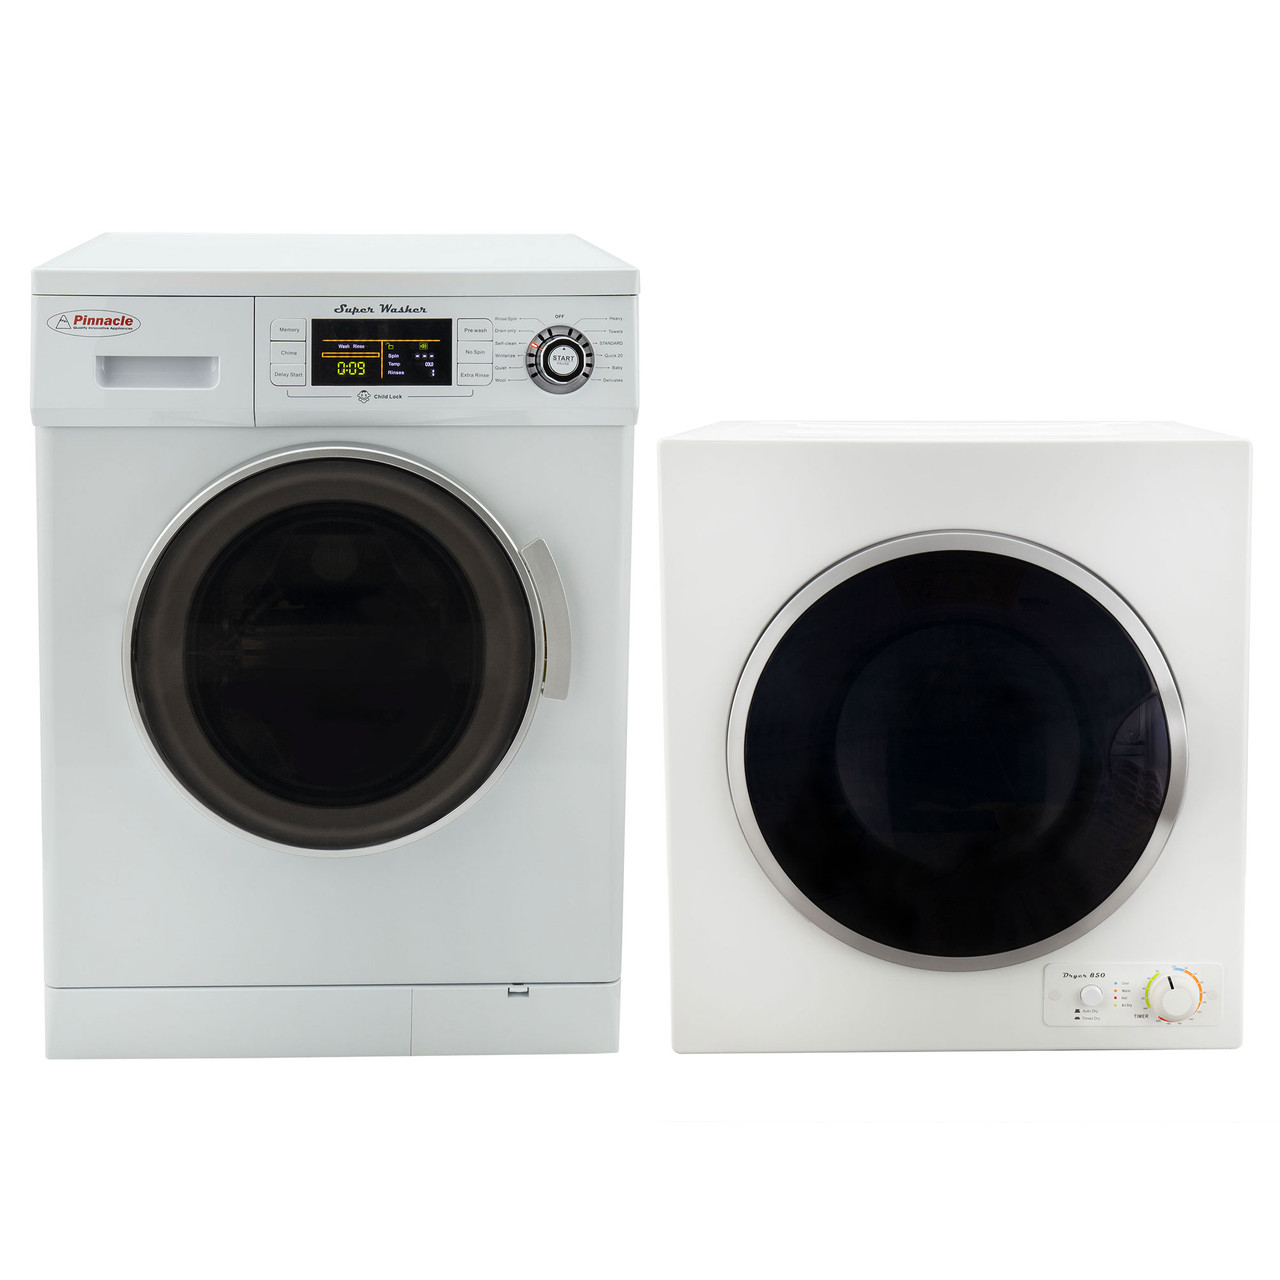 https://cdn11.bigcommerce.com/s-kwuh809851/images/stencil/1280x1280/products/1820/14444/Washer-Dryer-Combo__67499.1698946136.jpg?c=2